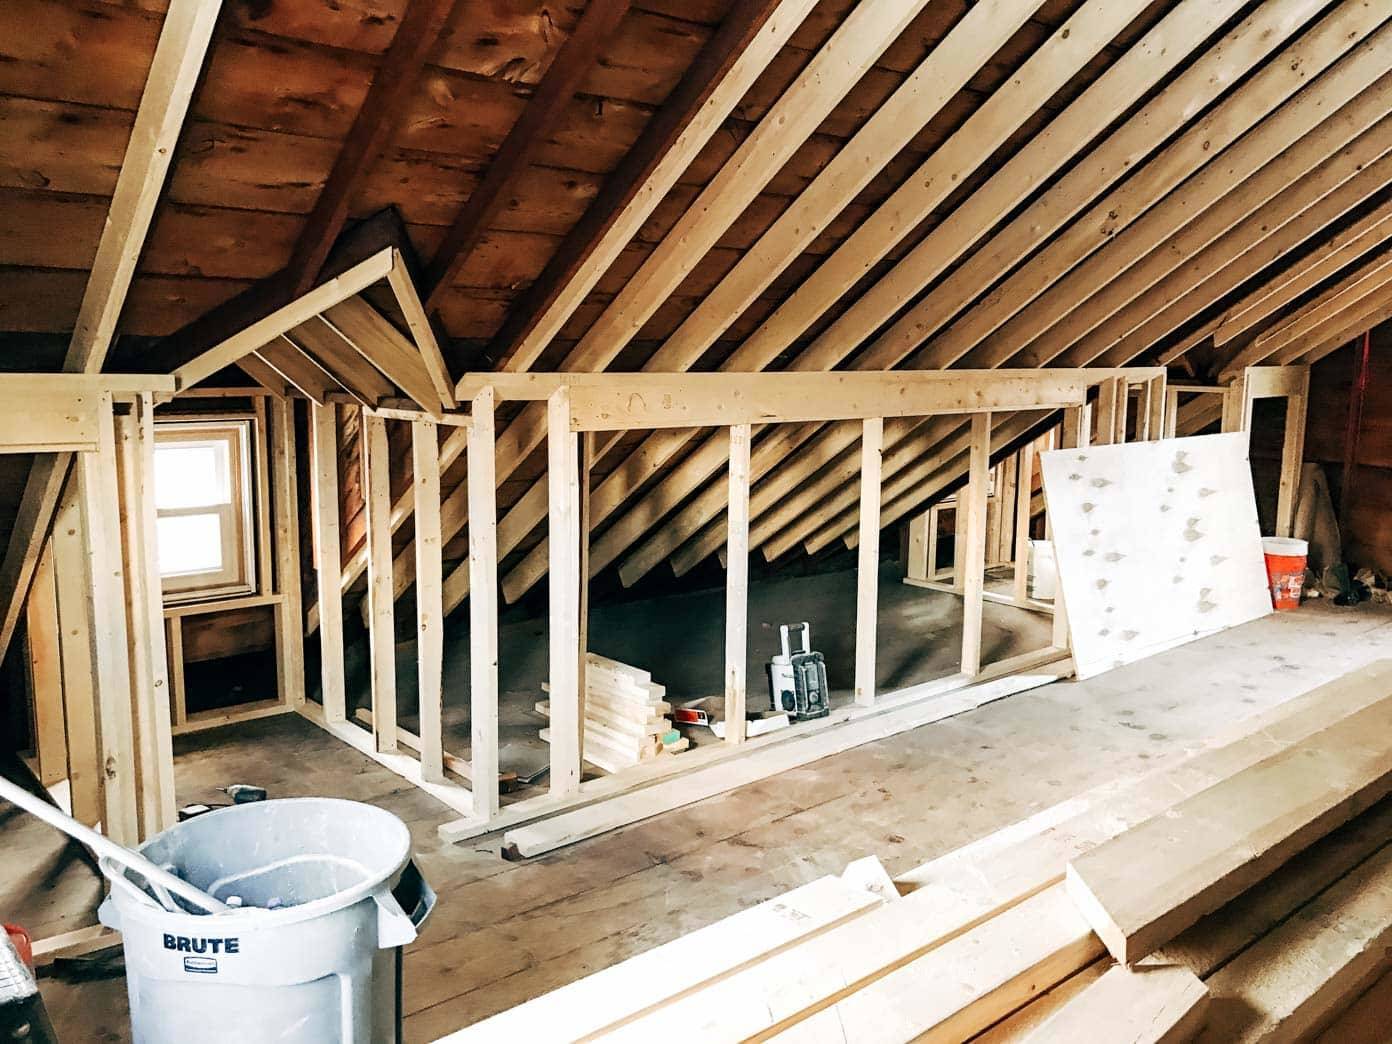 Remodeling attic with large wooden beams.